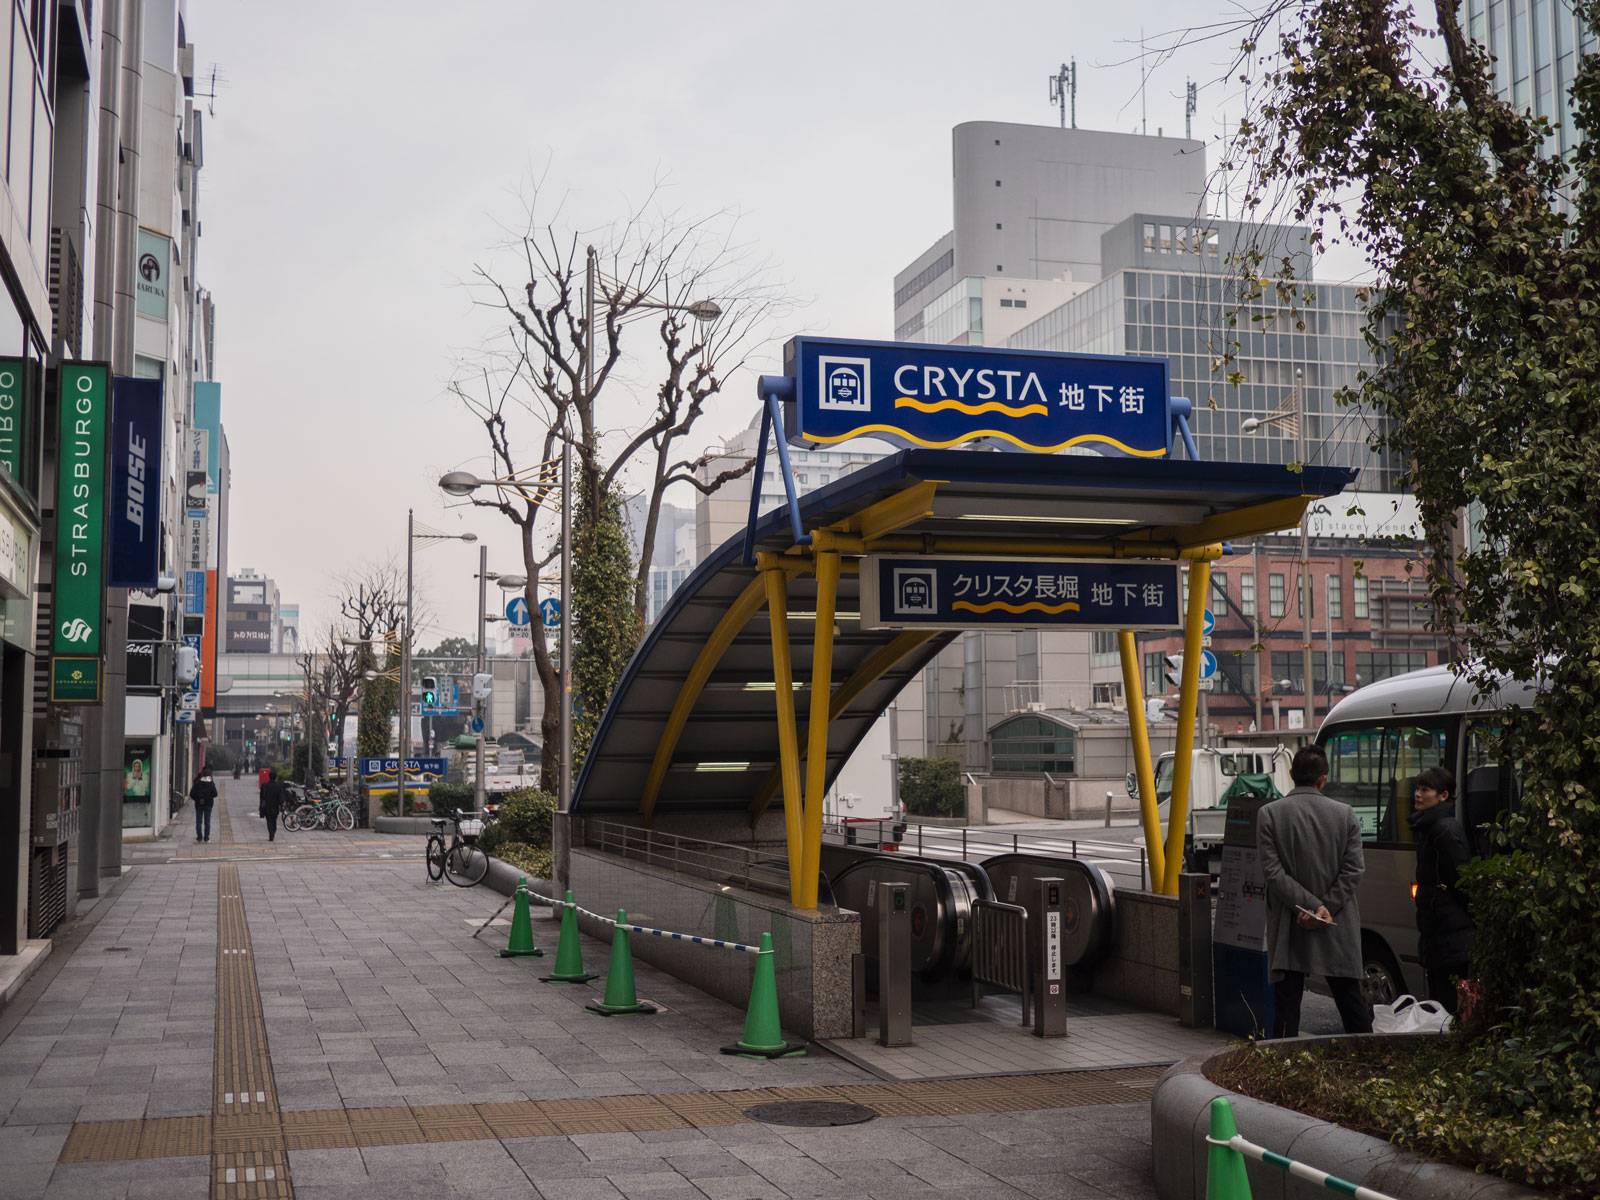 Approaching a subway entrance